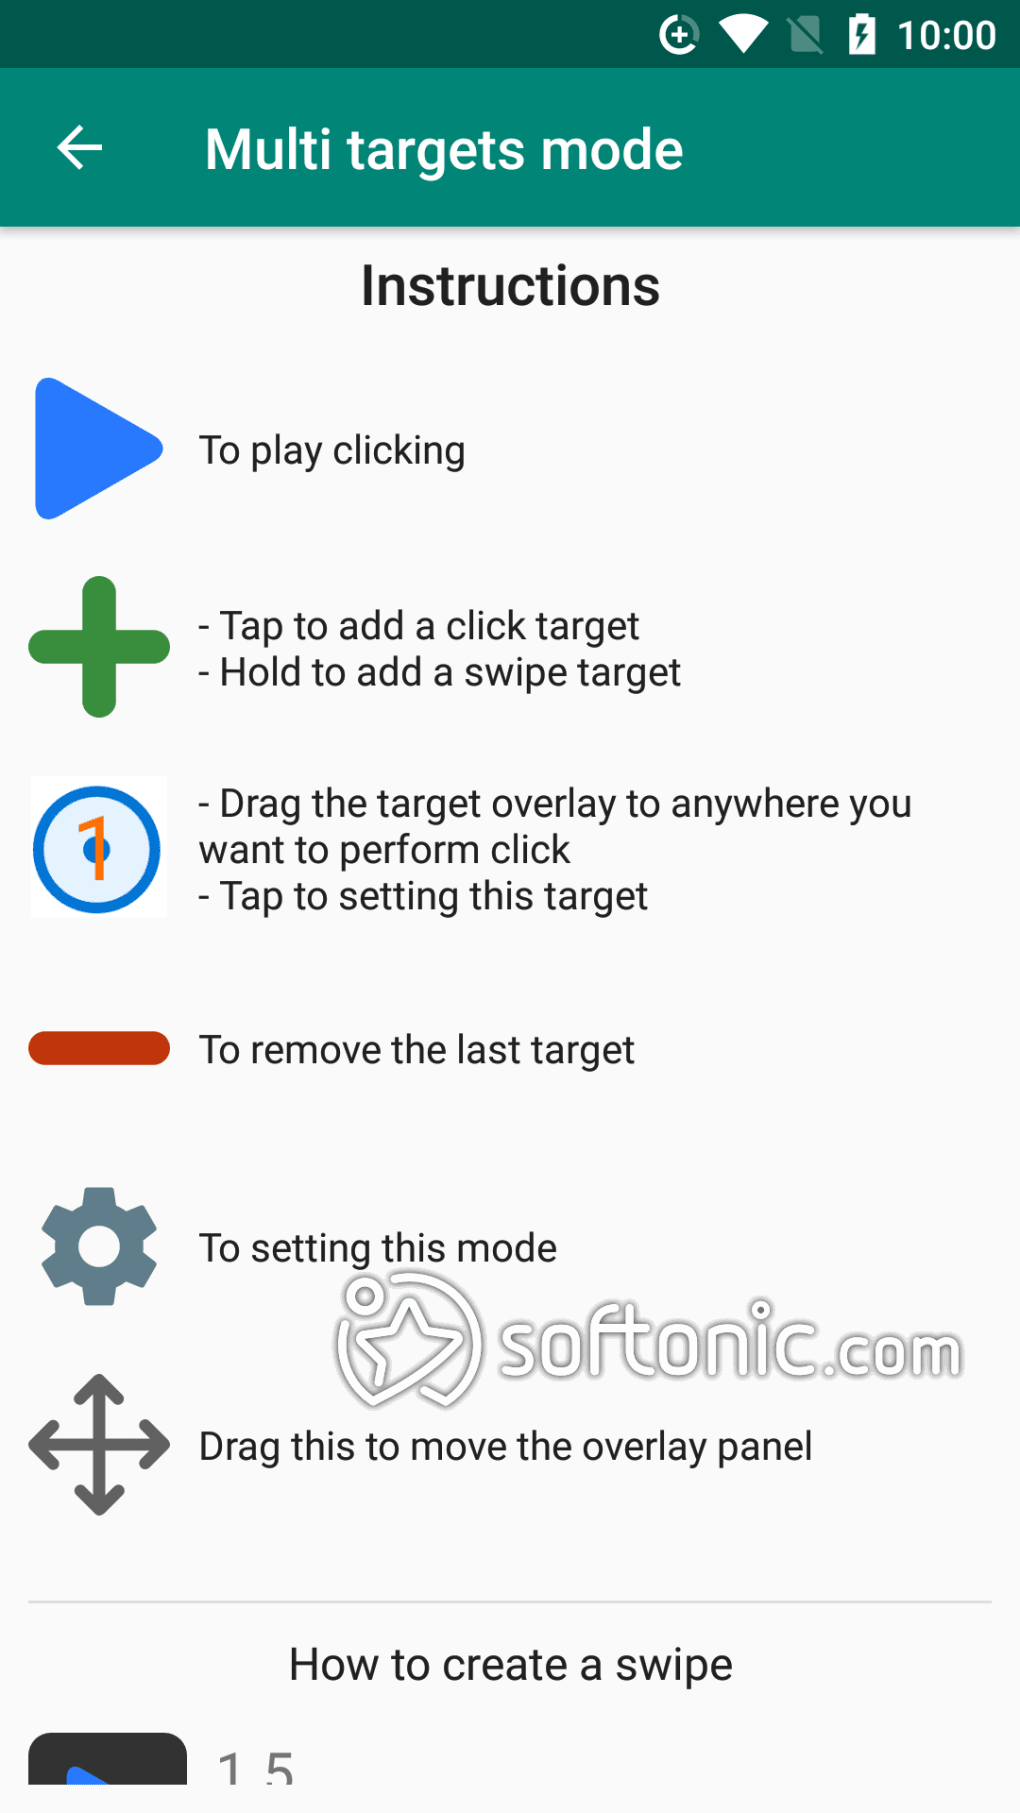 Auto Click: Automatic Clicker for Android - Free App Download